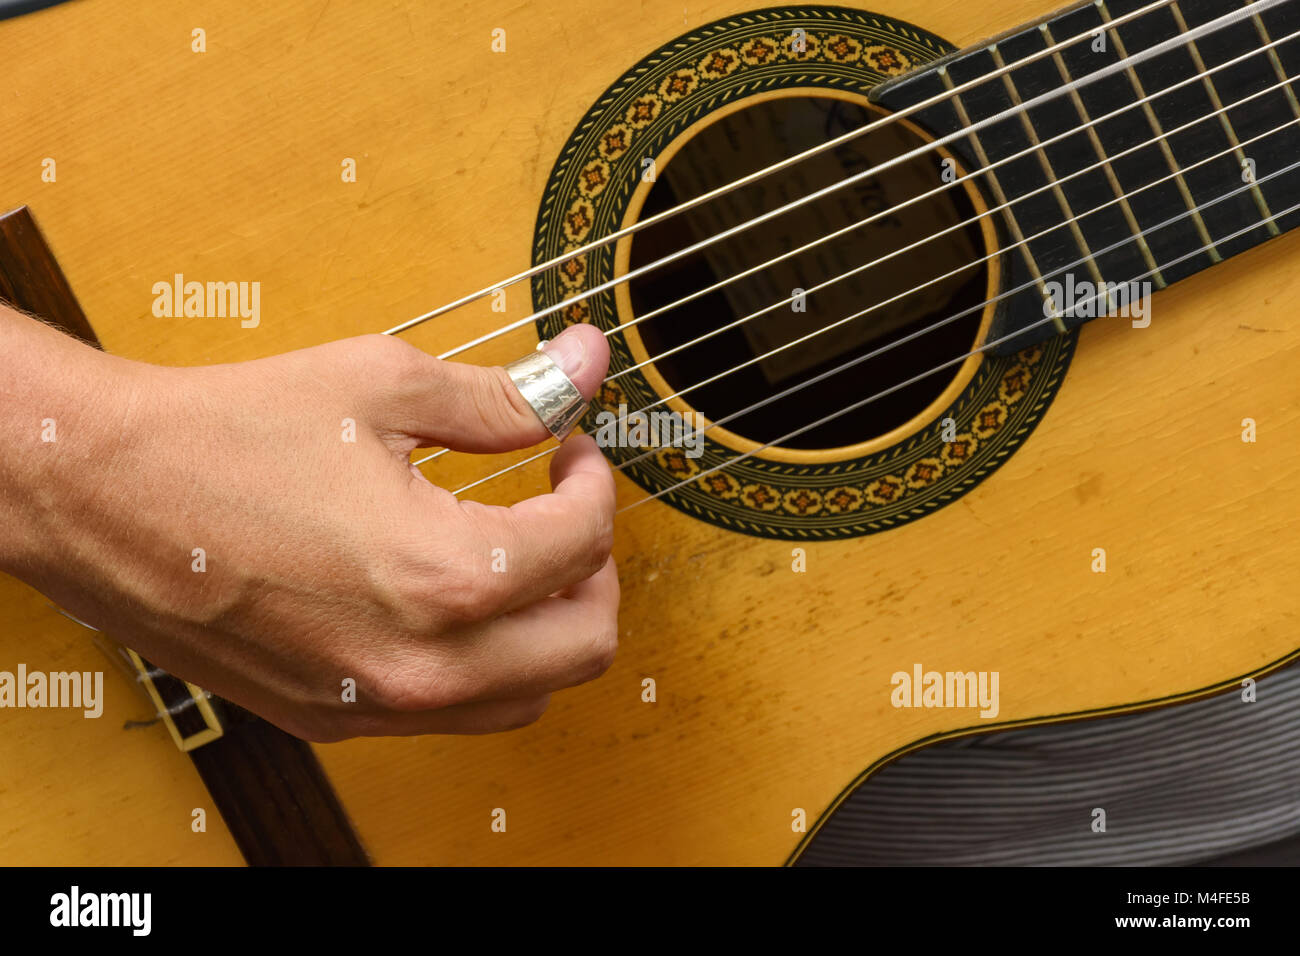 Seven strings acoustic guitar Stock Photo